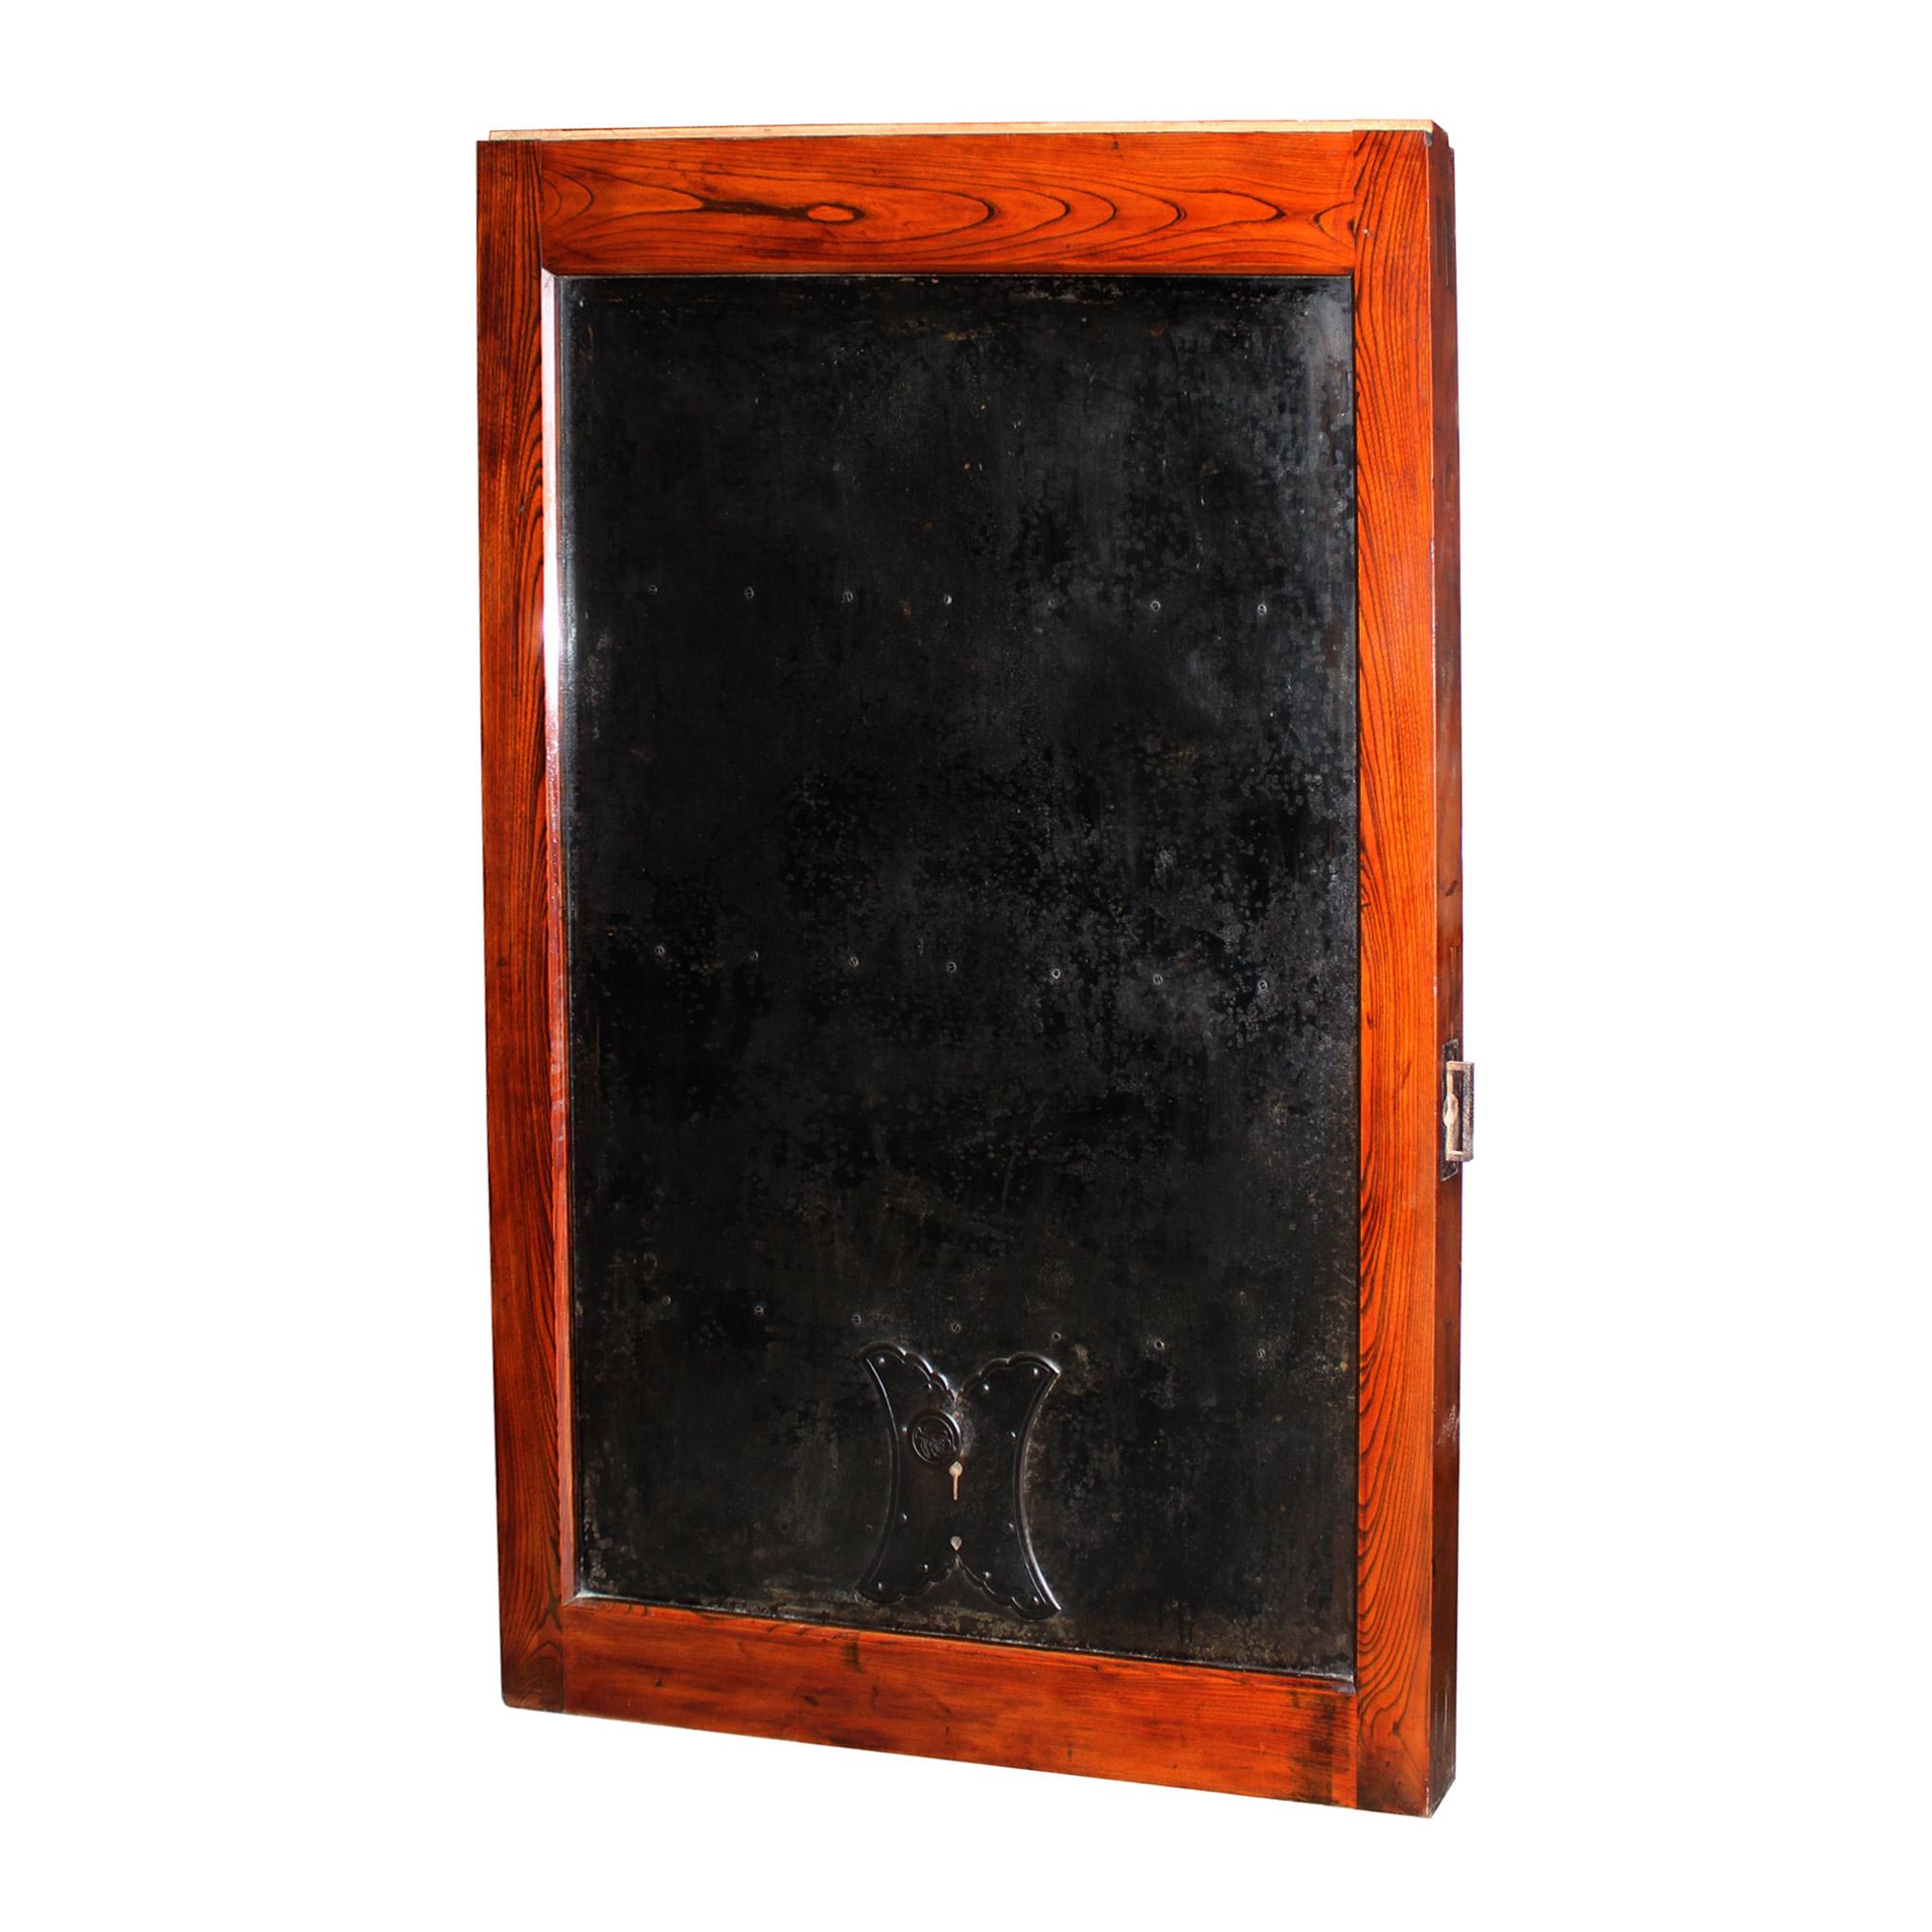 Keyaki wood warehouse door was used as the main door to a furniture warehouse in Kyoto, Japan. Keyaki wood with original metal and lockplate. Edo period, circa 1850s. Can use as the top of a large dining or coffee table with custom base or use as an